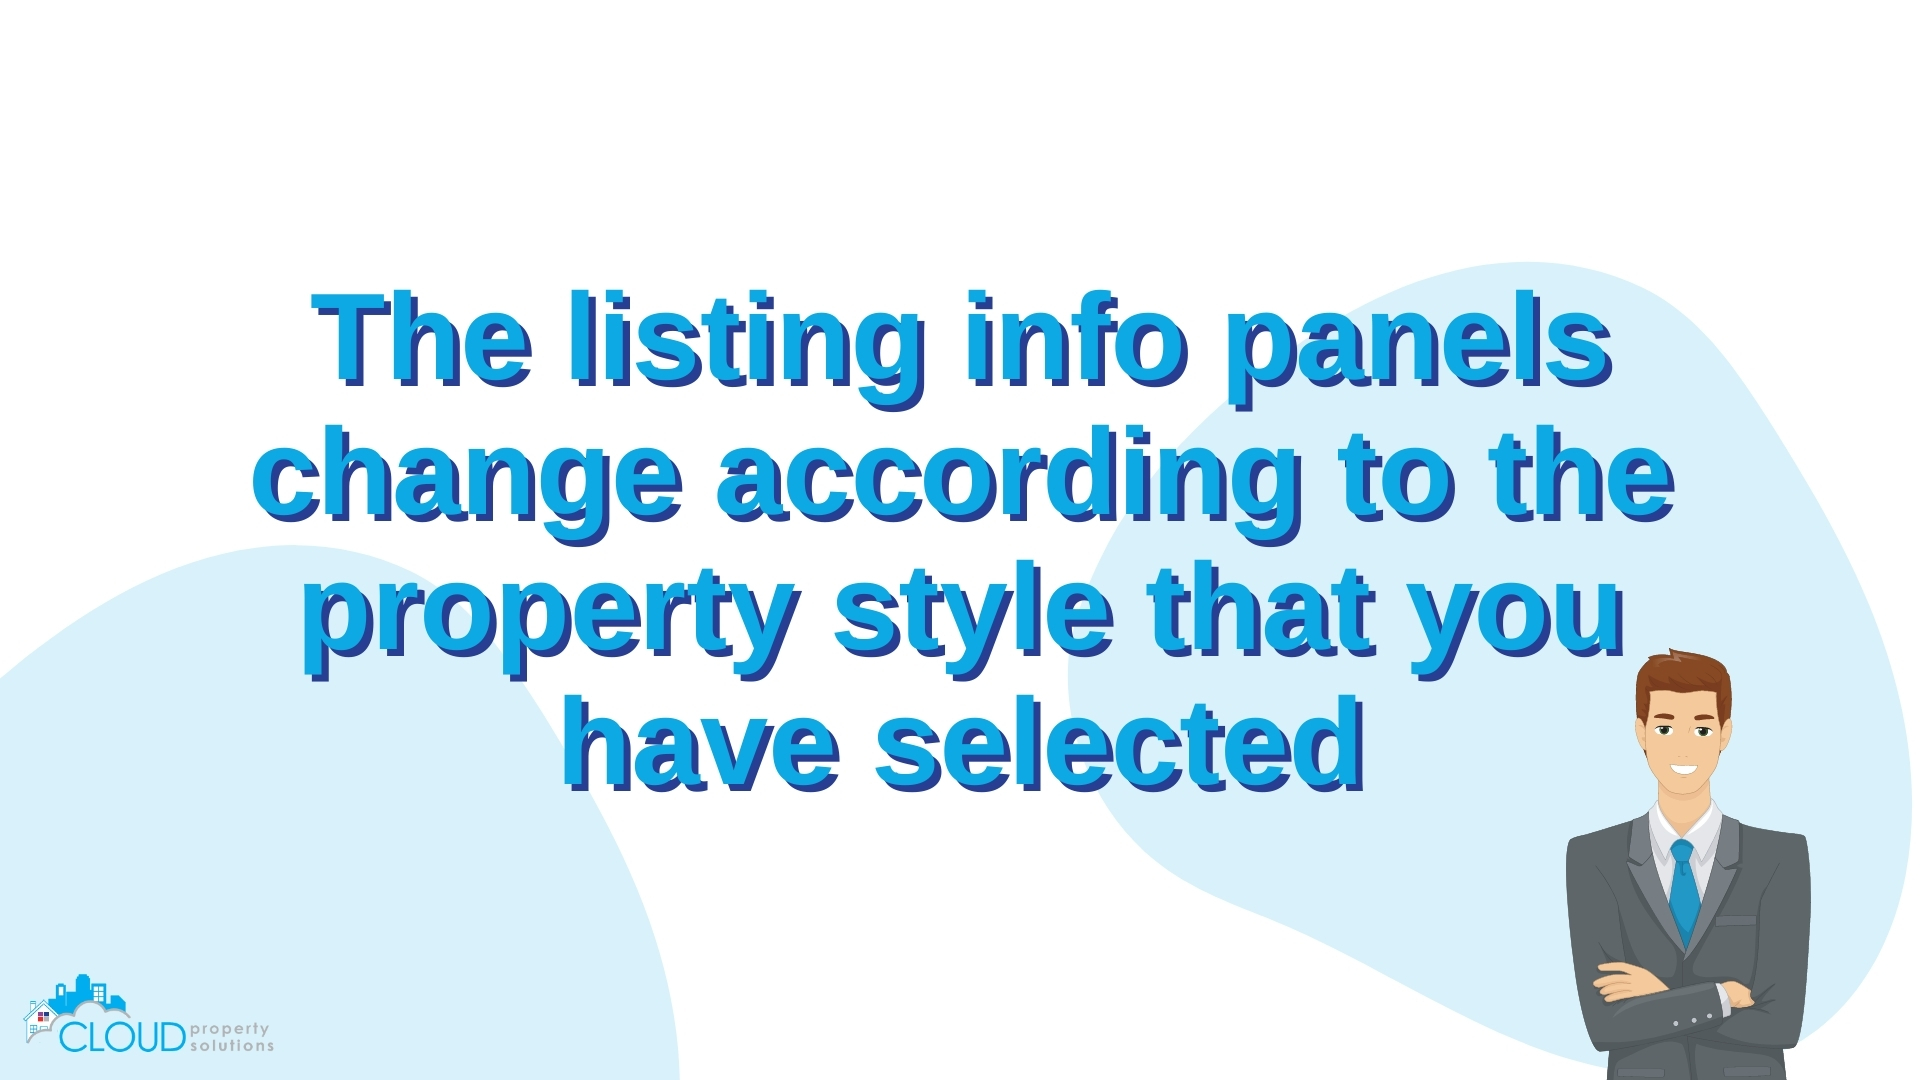 The listing info panels change according to the property style that you have selected